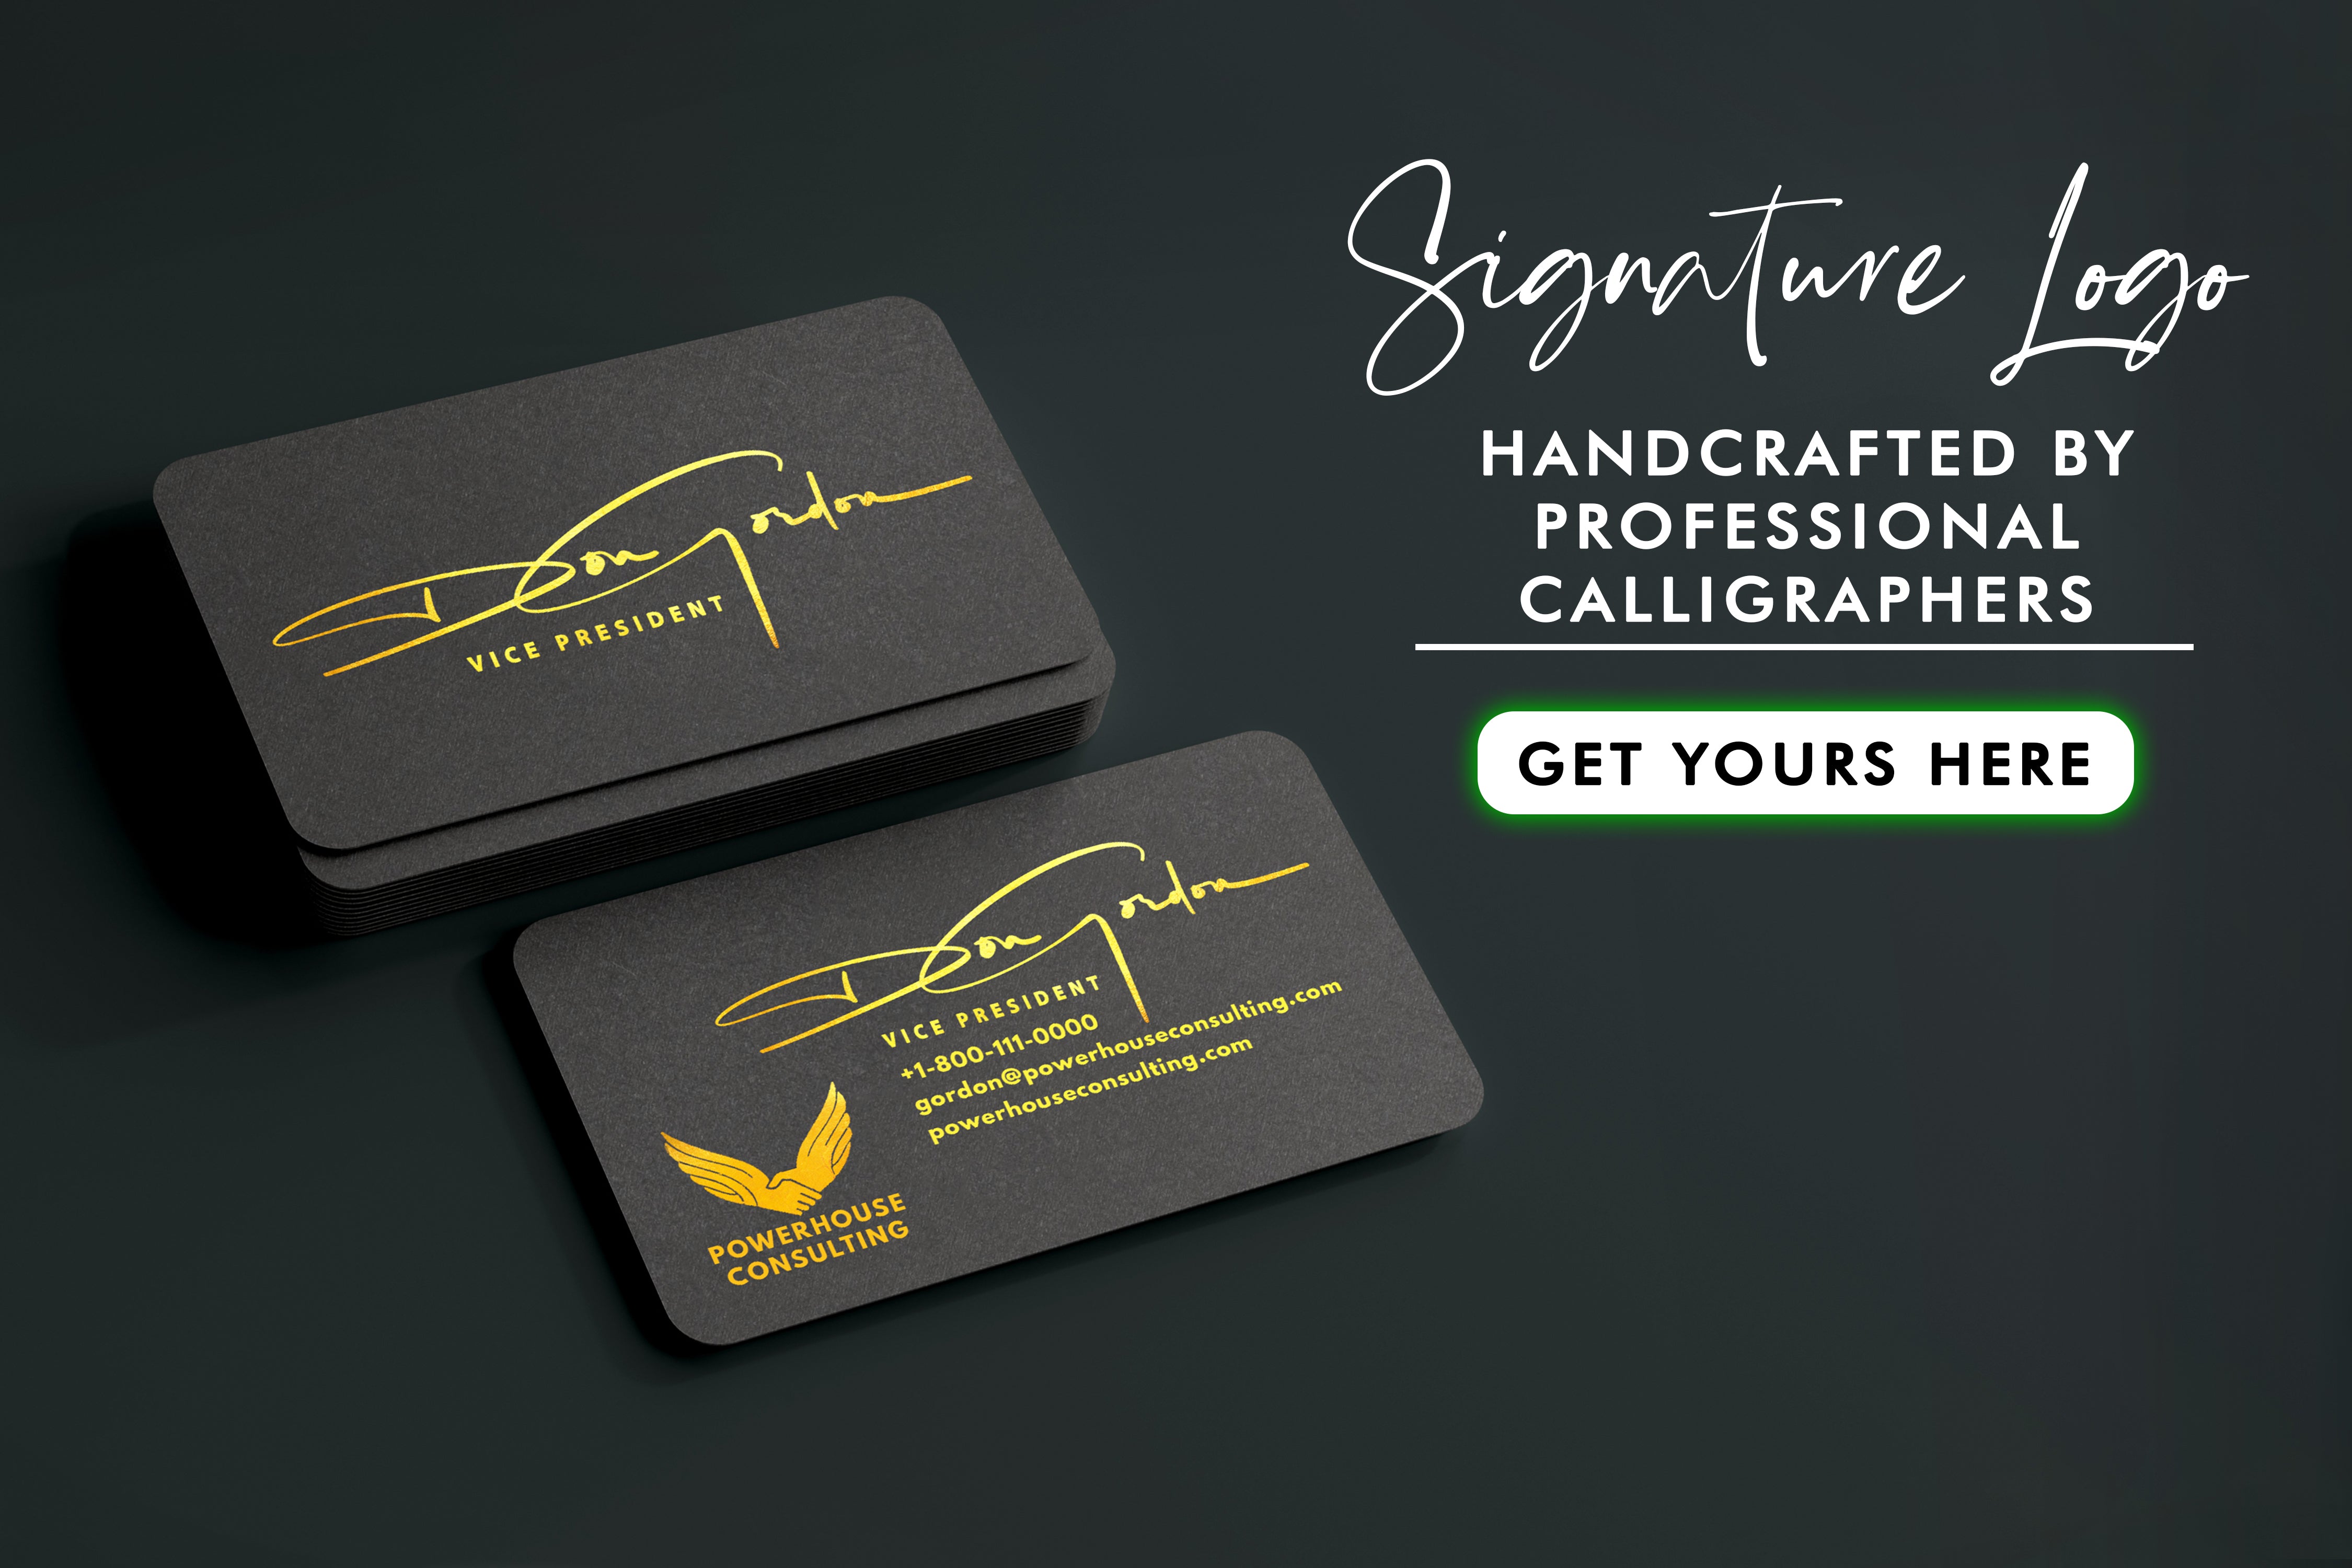 Discover the benefits of using business card templates for small business owners, freelancers, and entrepreneurs. Create professional business cards here.